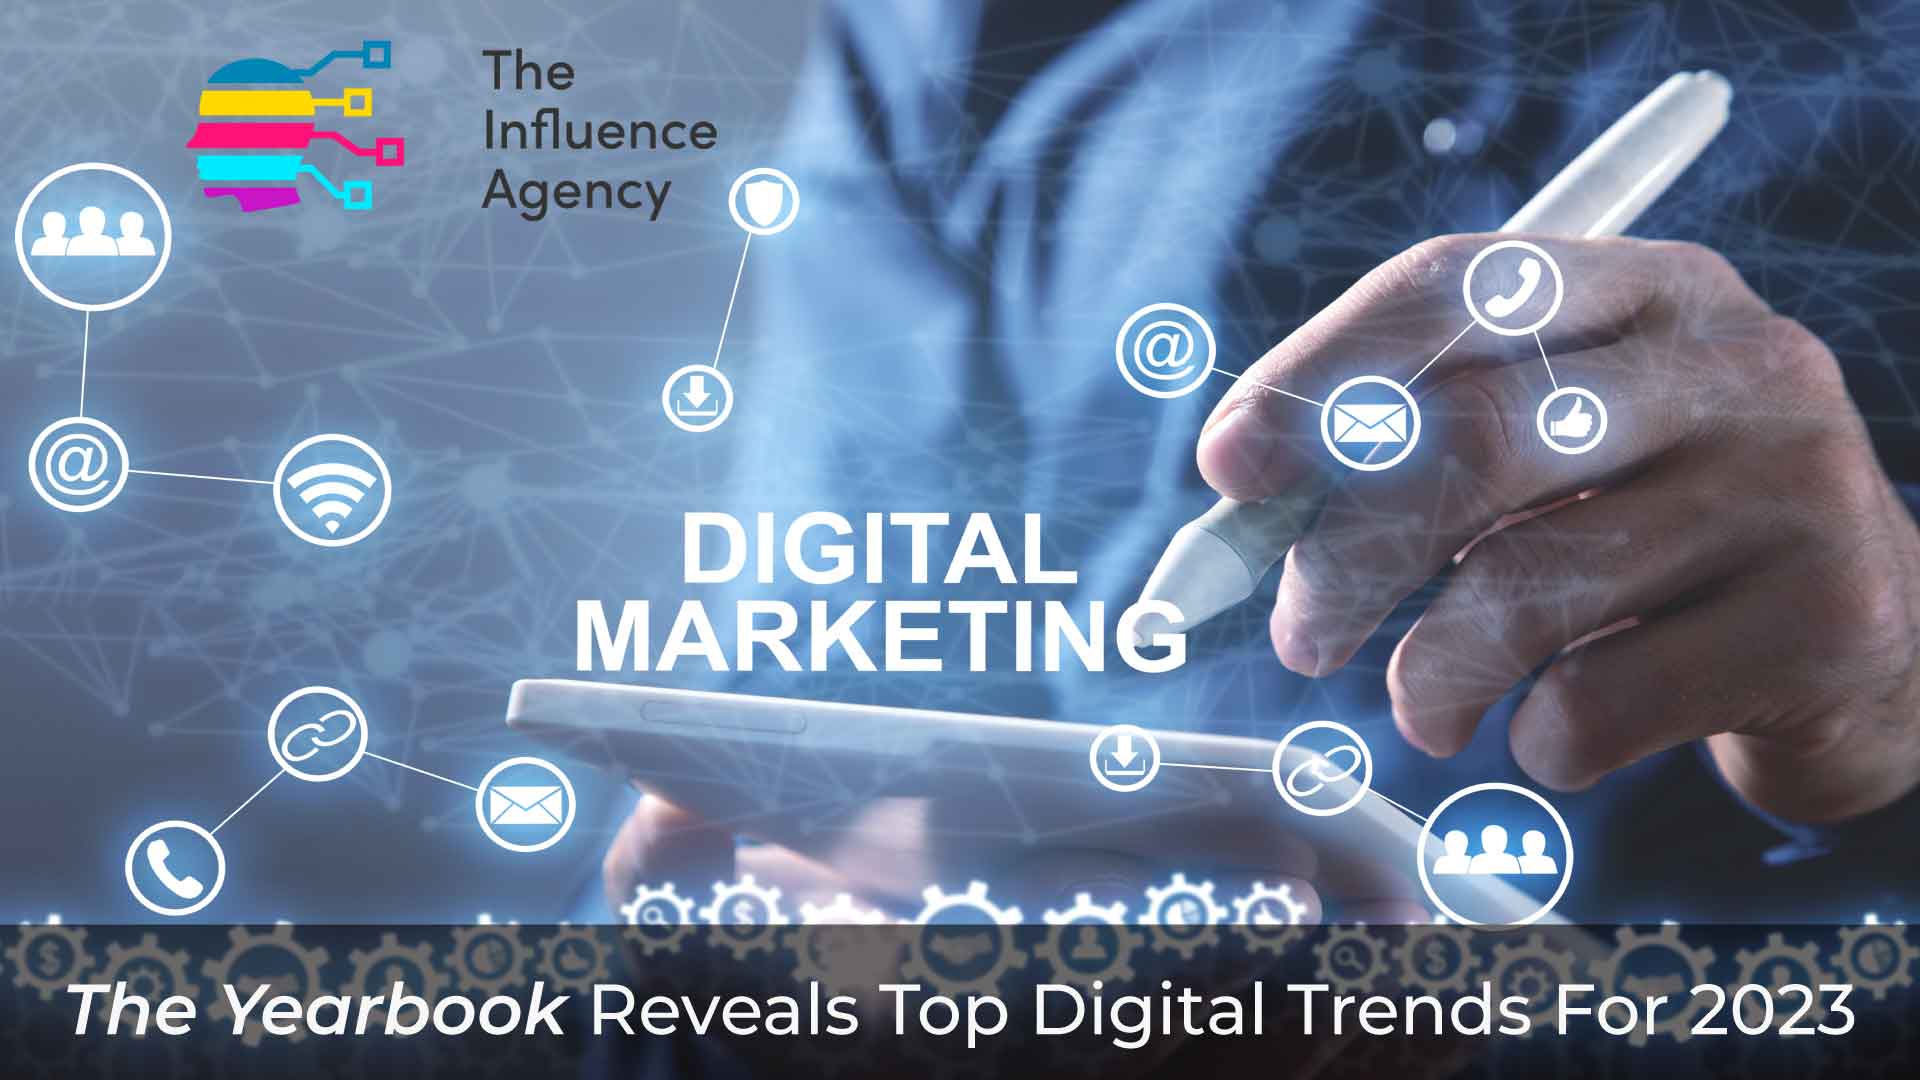 The Influence Agency Reveals The Top Digital Trends For 2023 In The Yearbook